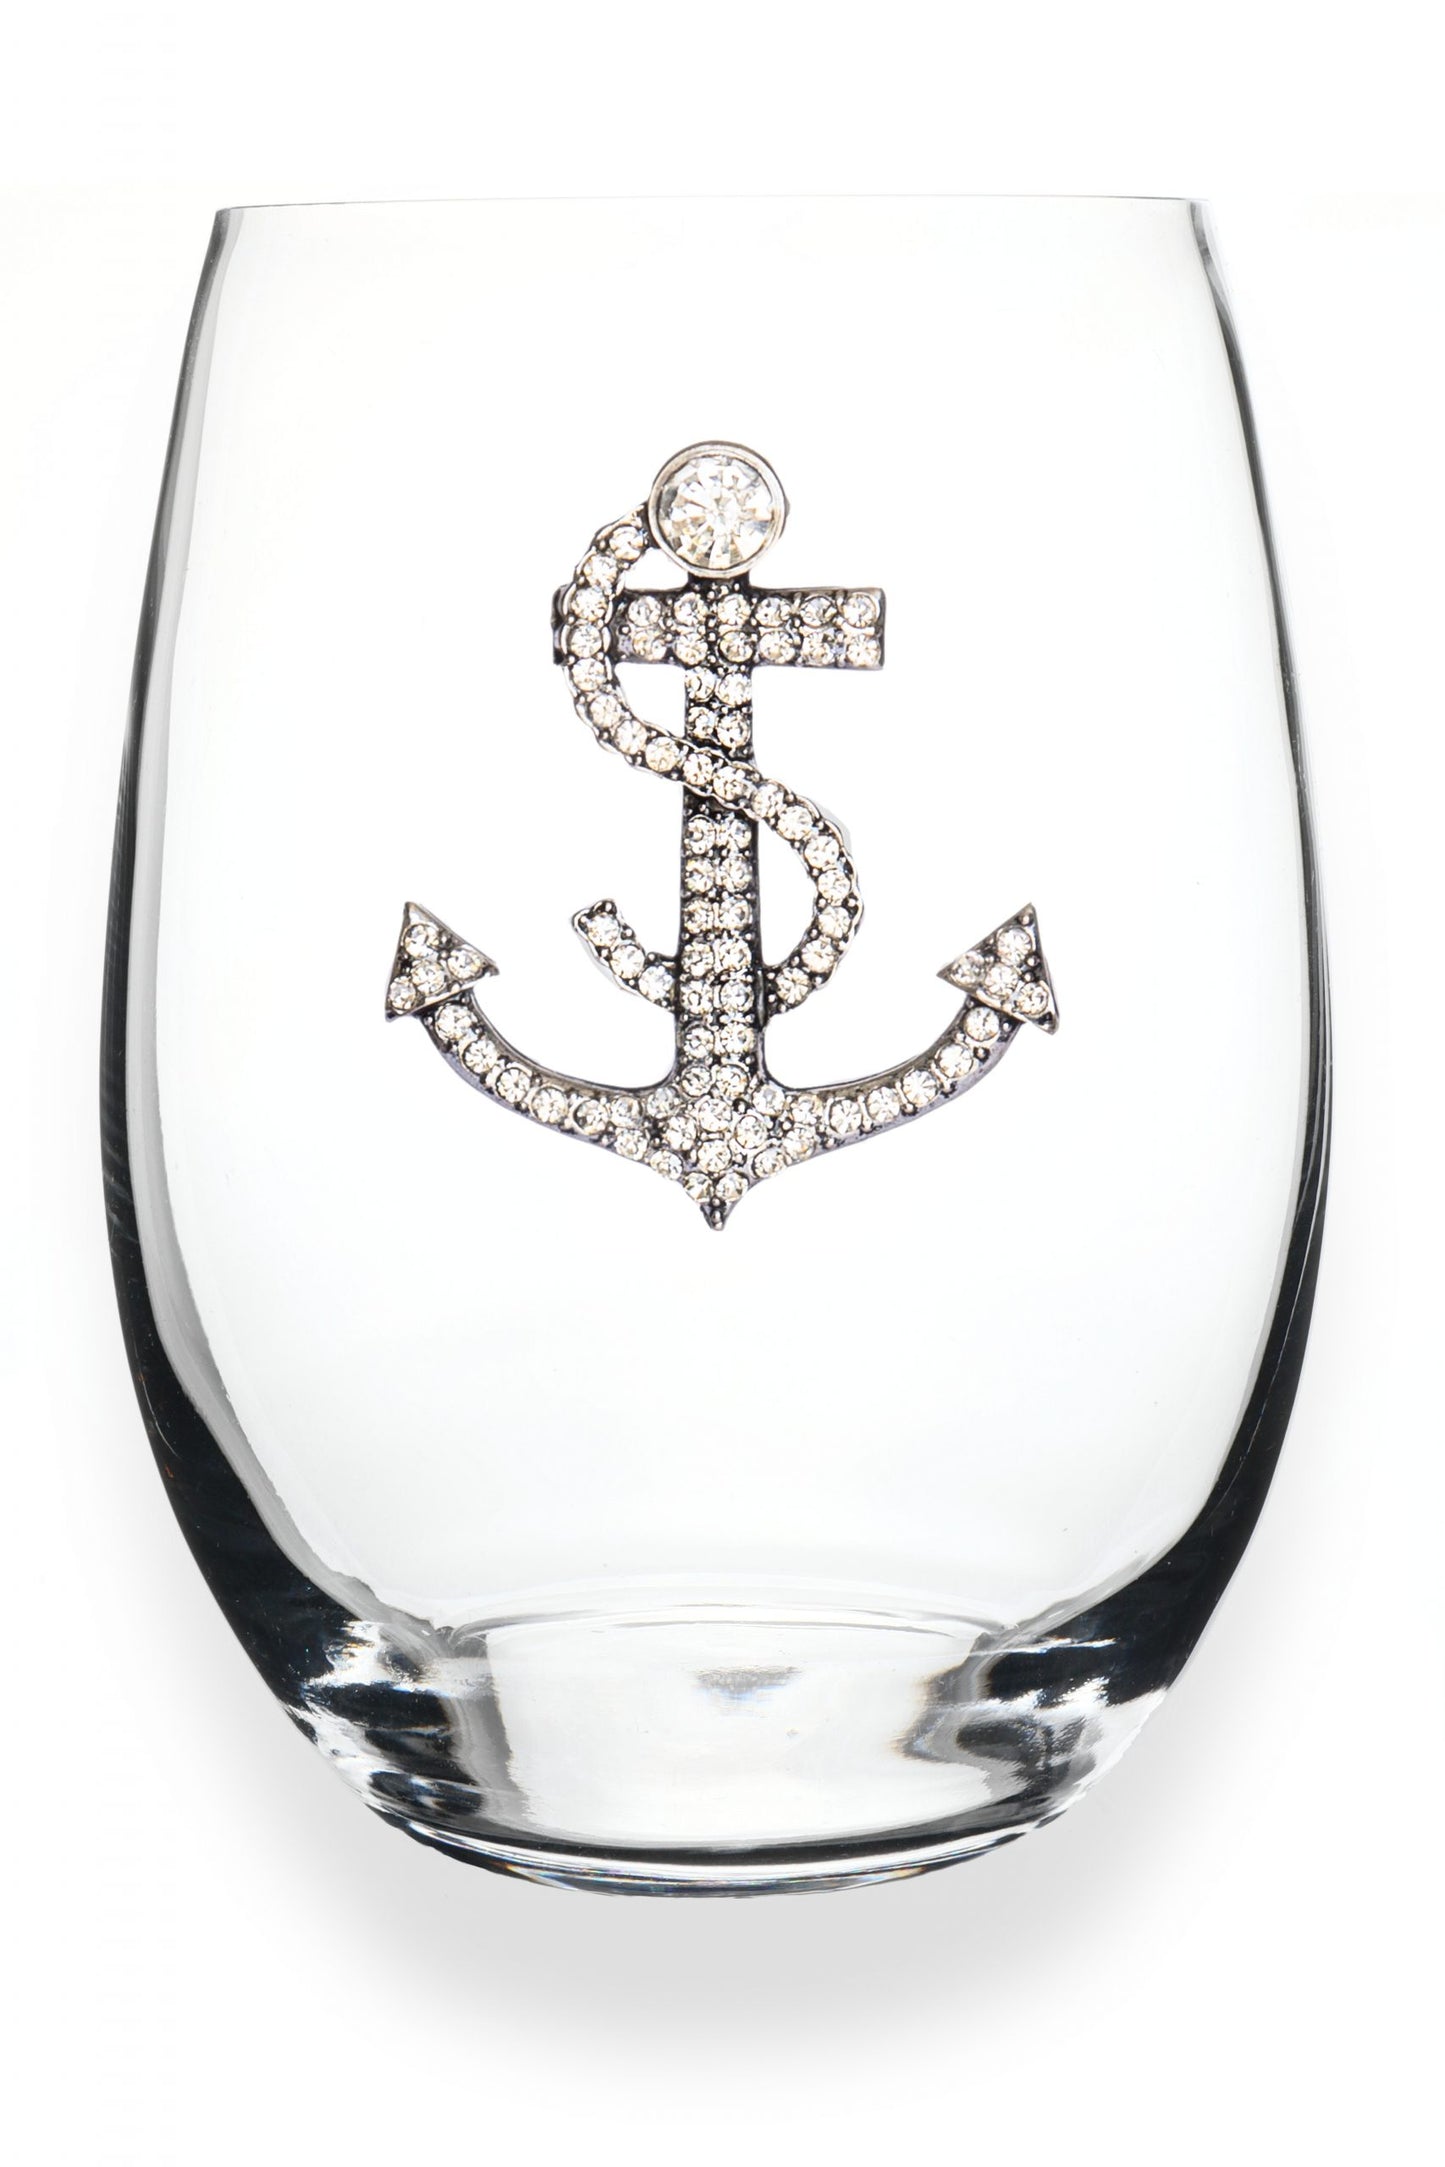 ANCHOR JEWELED STEMLESS